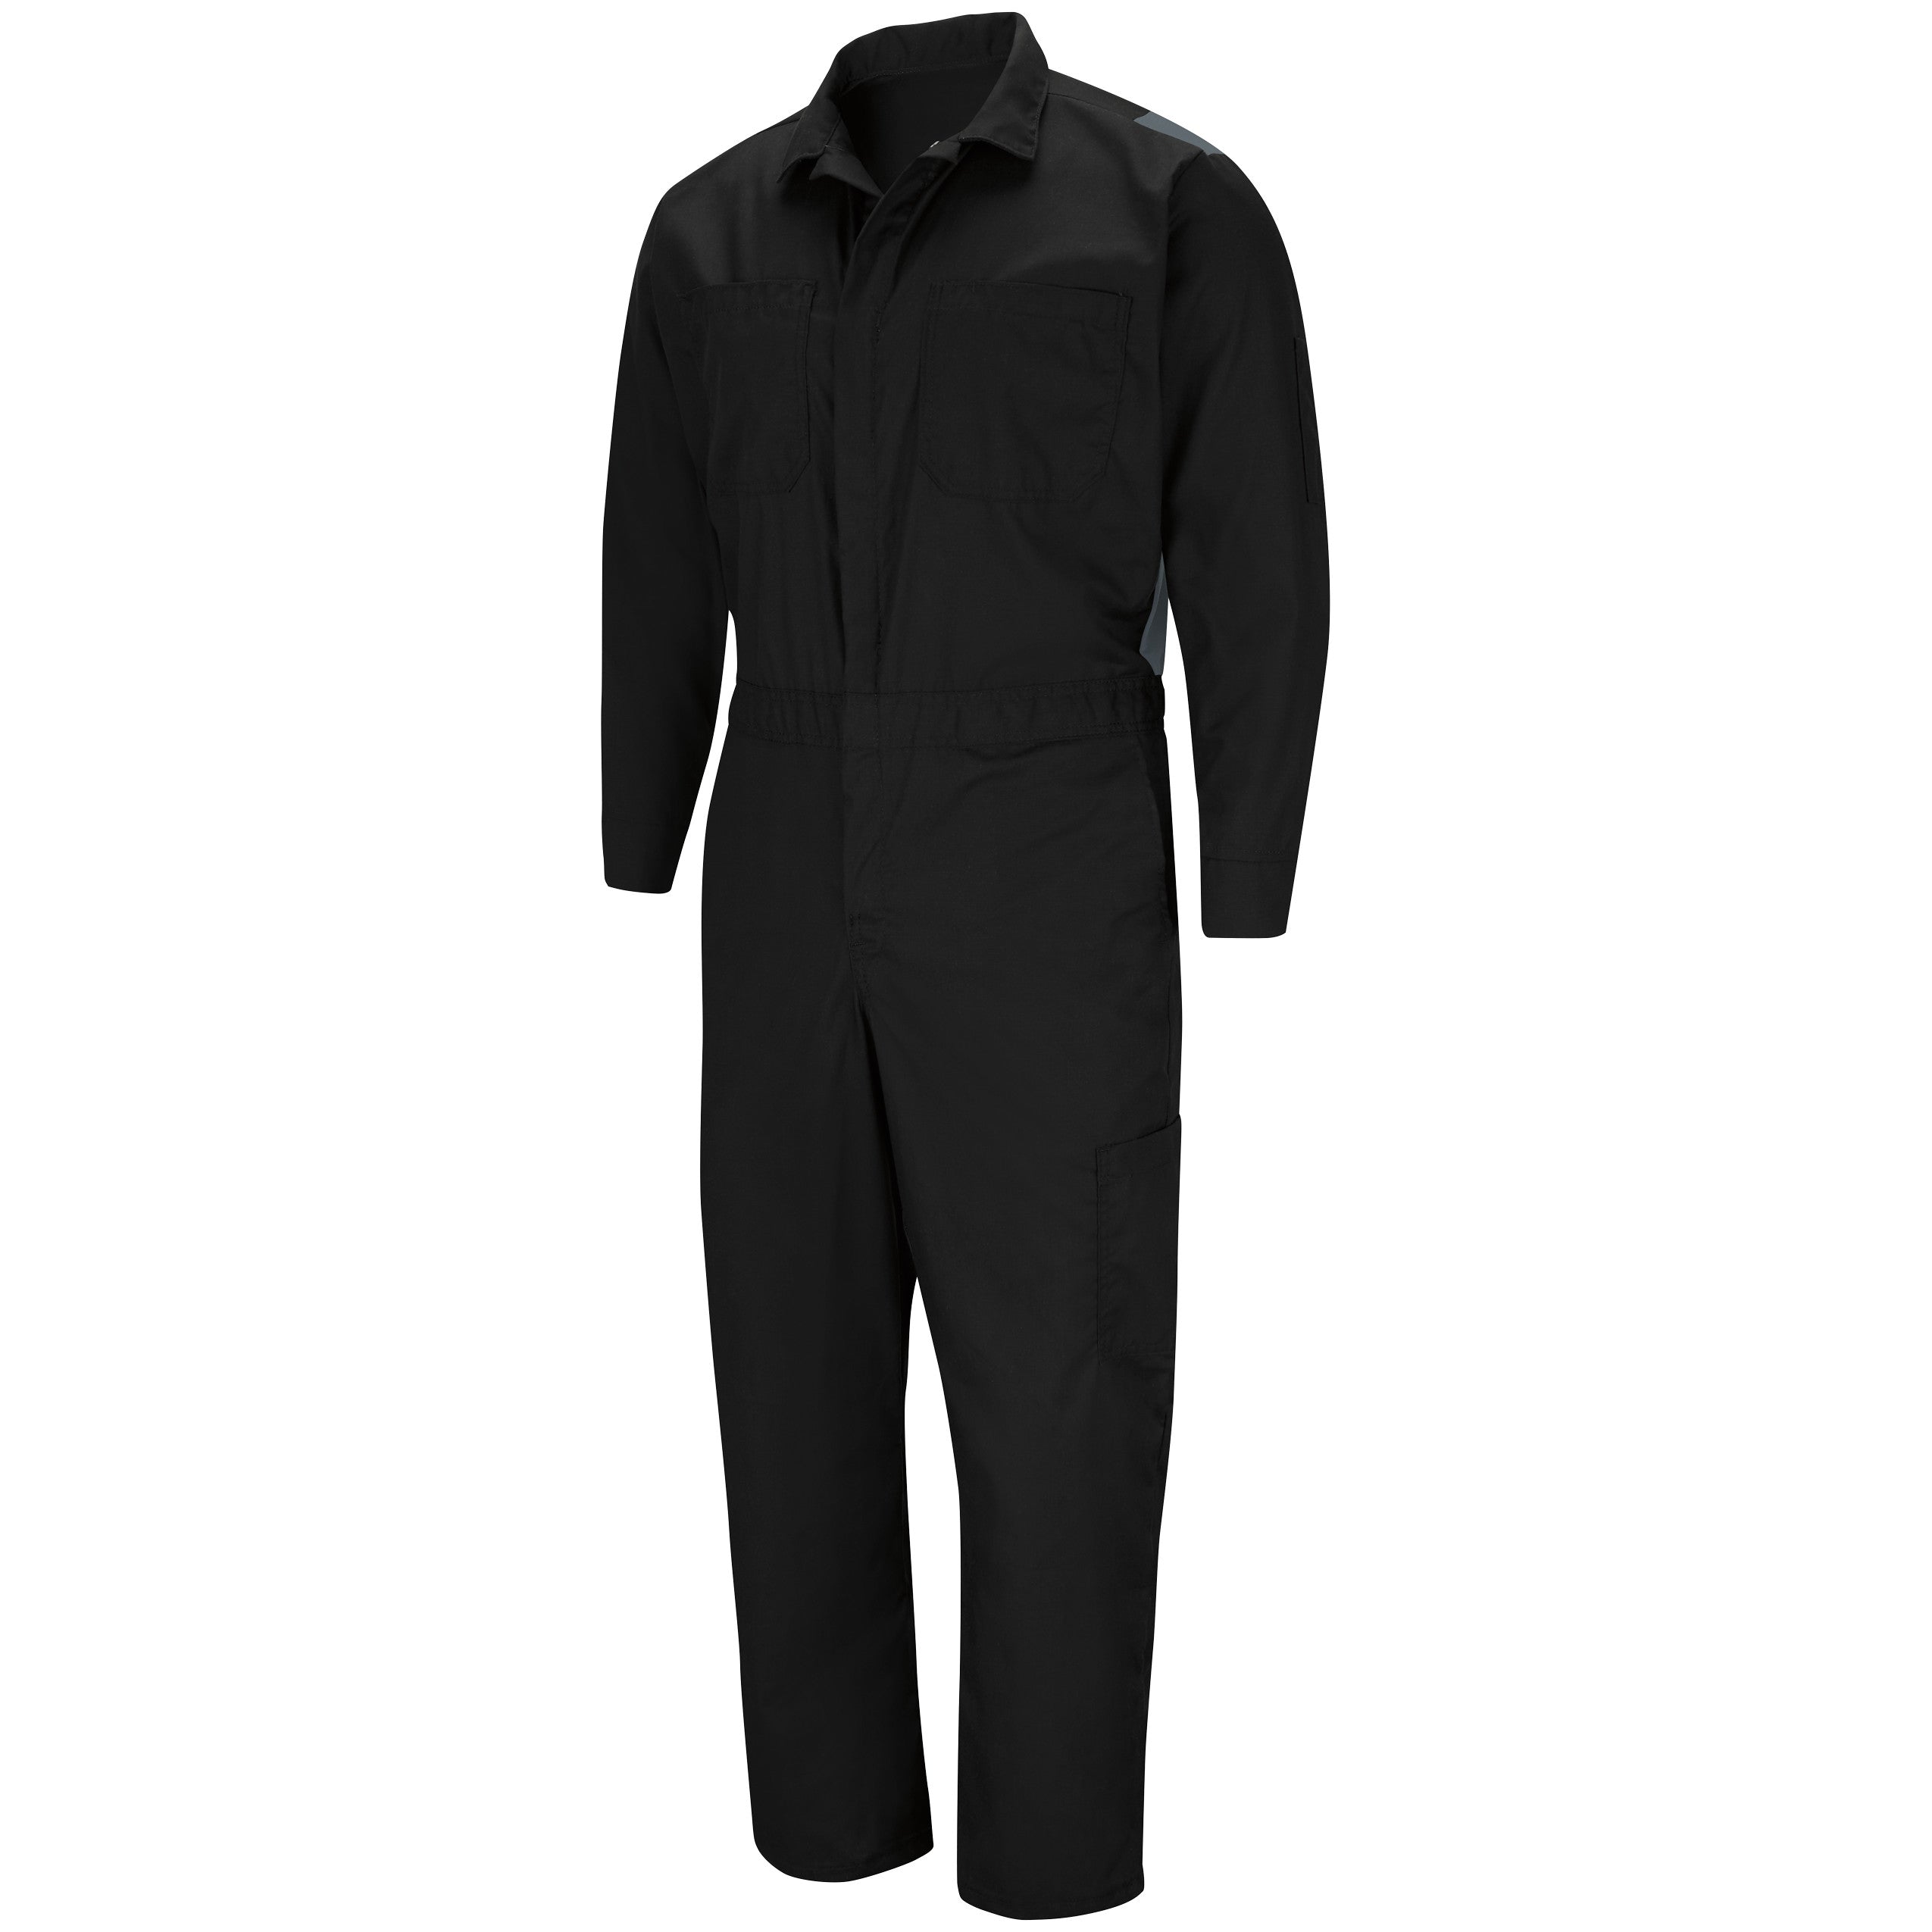 Performance Plus Lightweight Coverall with OilBlok Technology CY34 - Black / Charcoal Mesh-eSafety Supplies, Inc